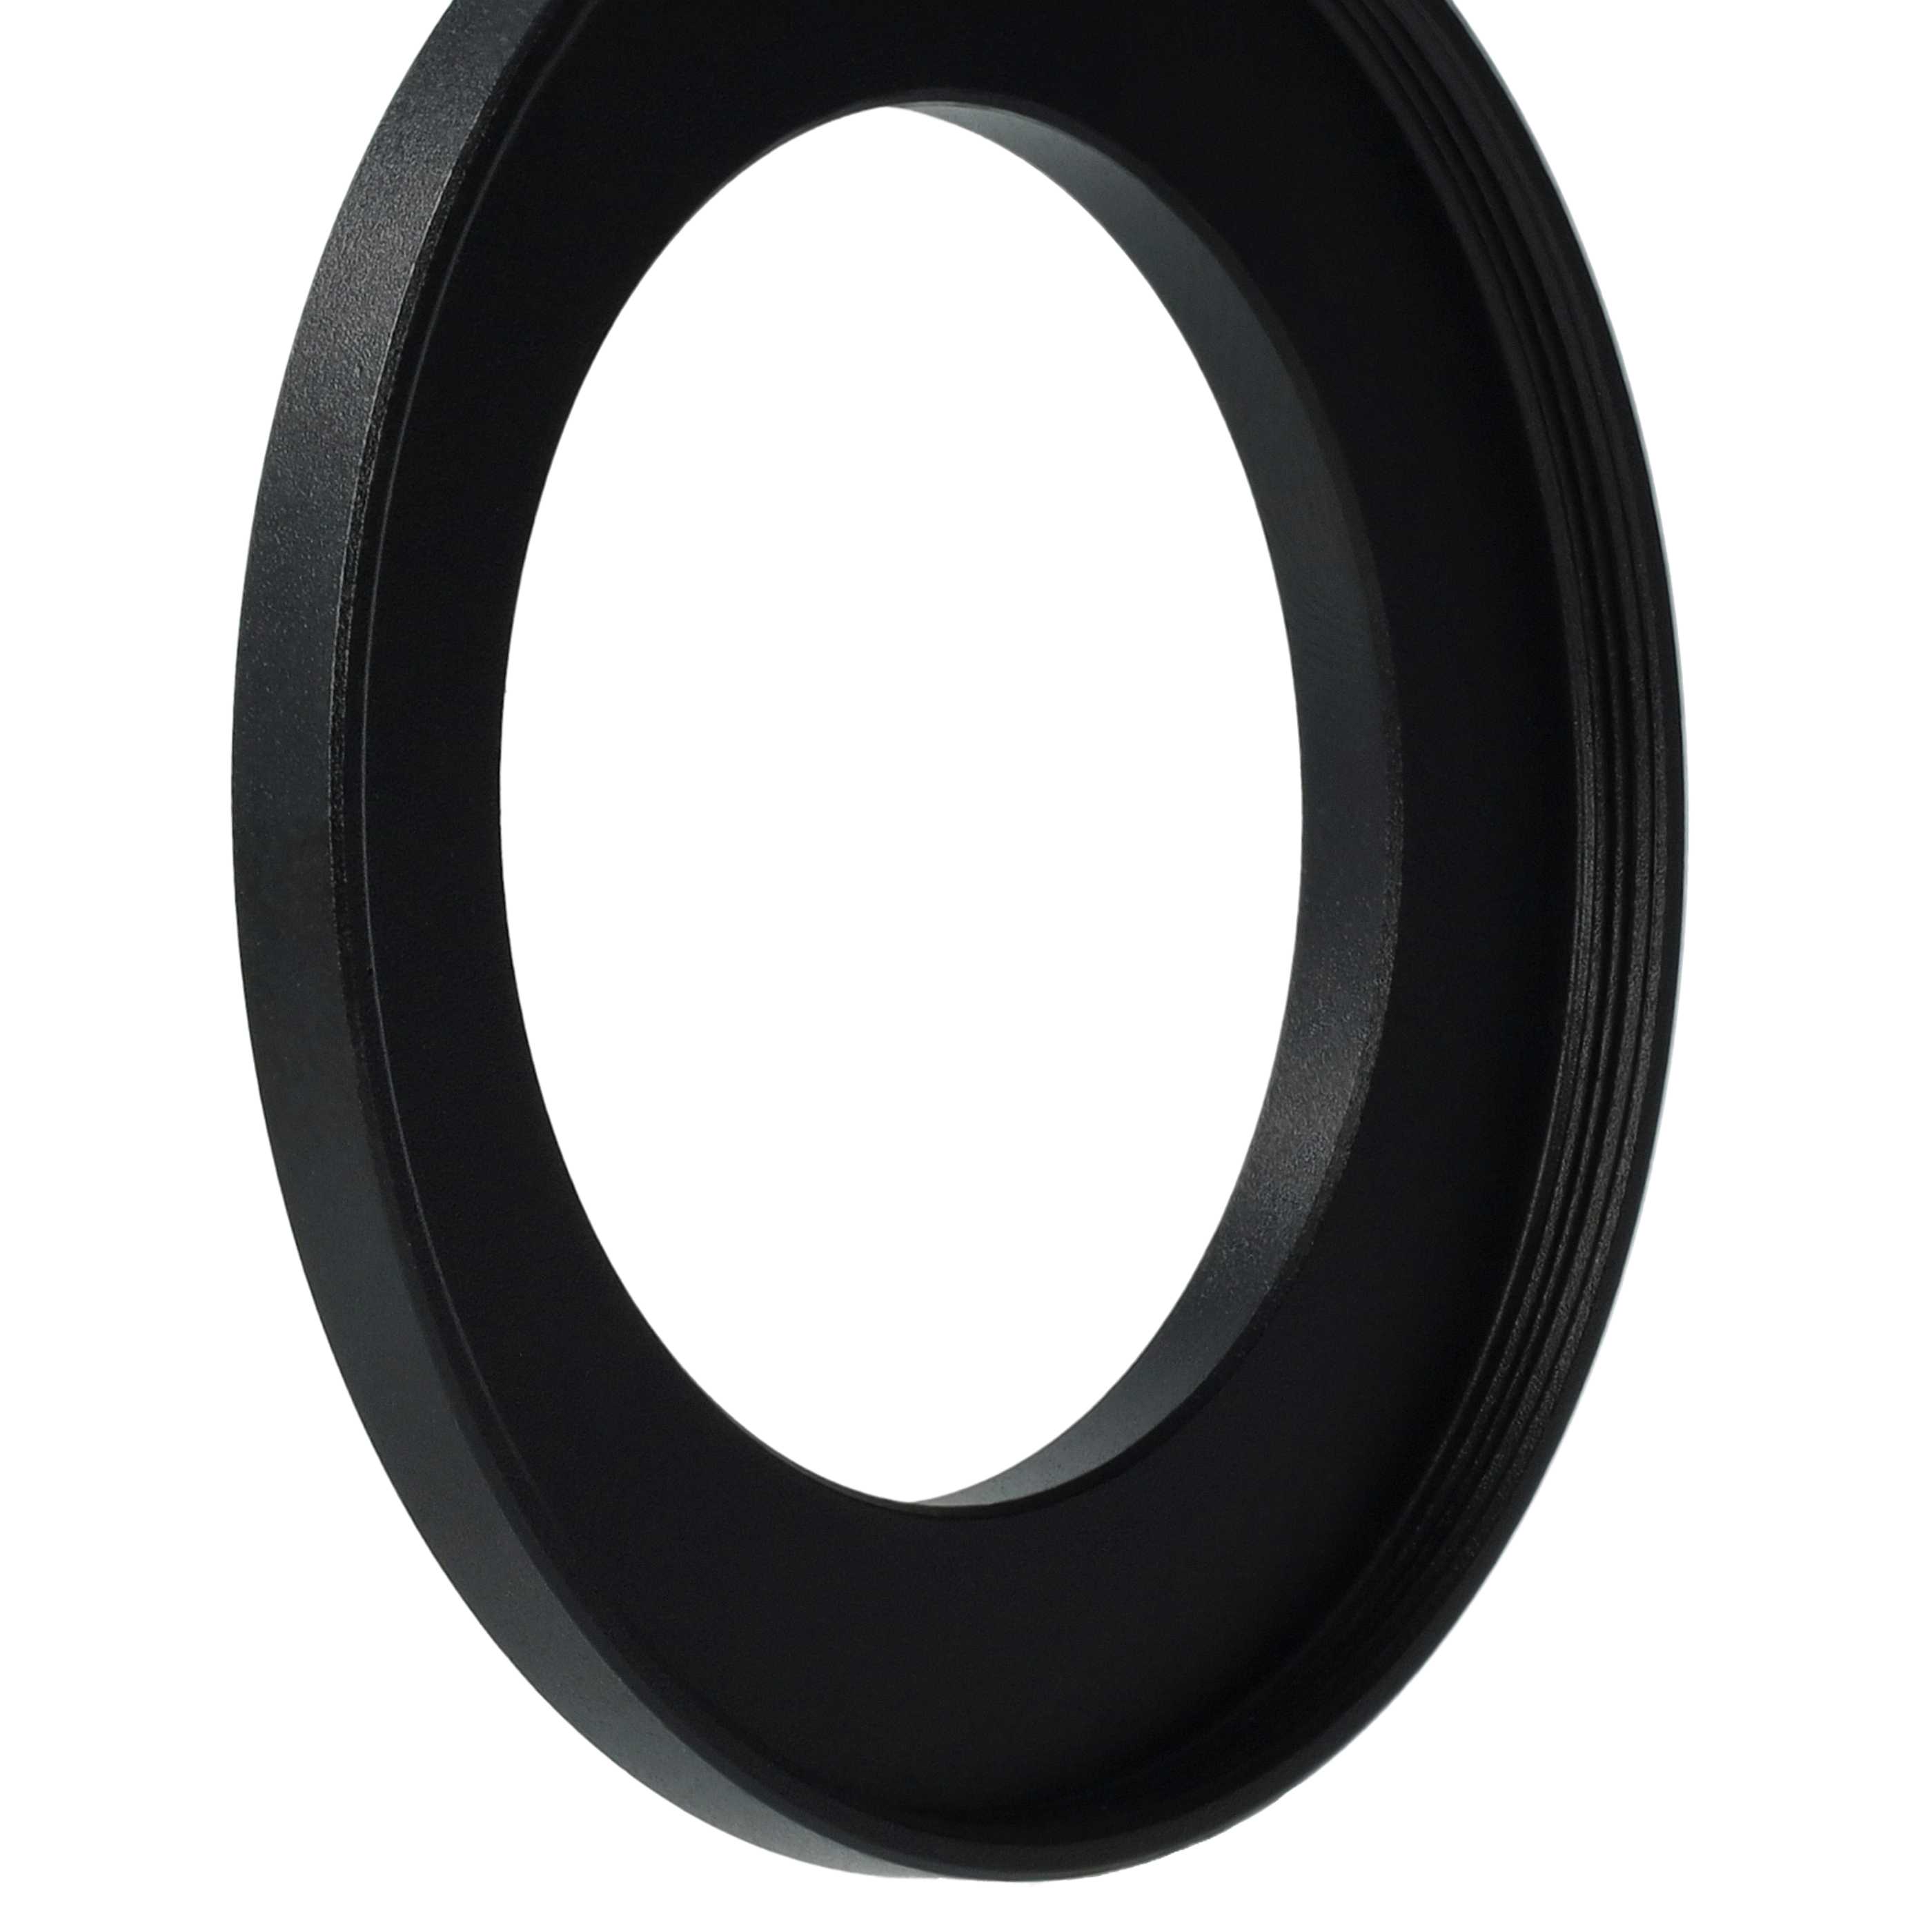 Step-Up Ring Adapter of 40.5 mm to 55 mmfor various Camera Lens - Filter Adapter